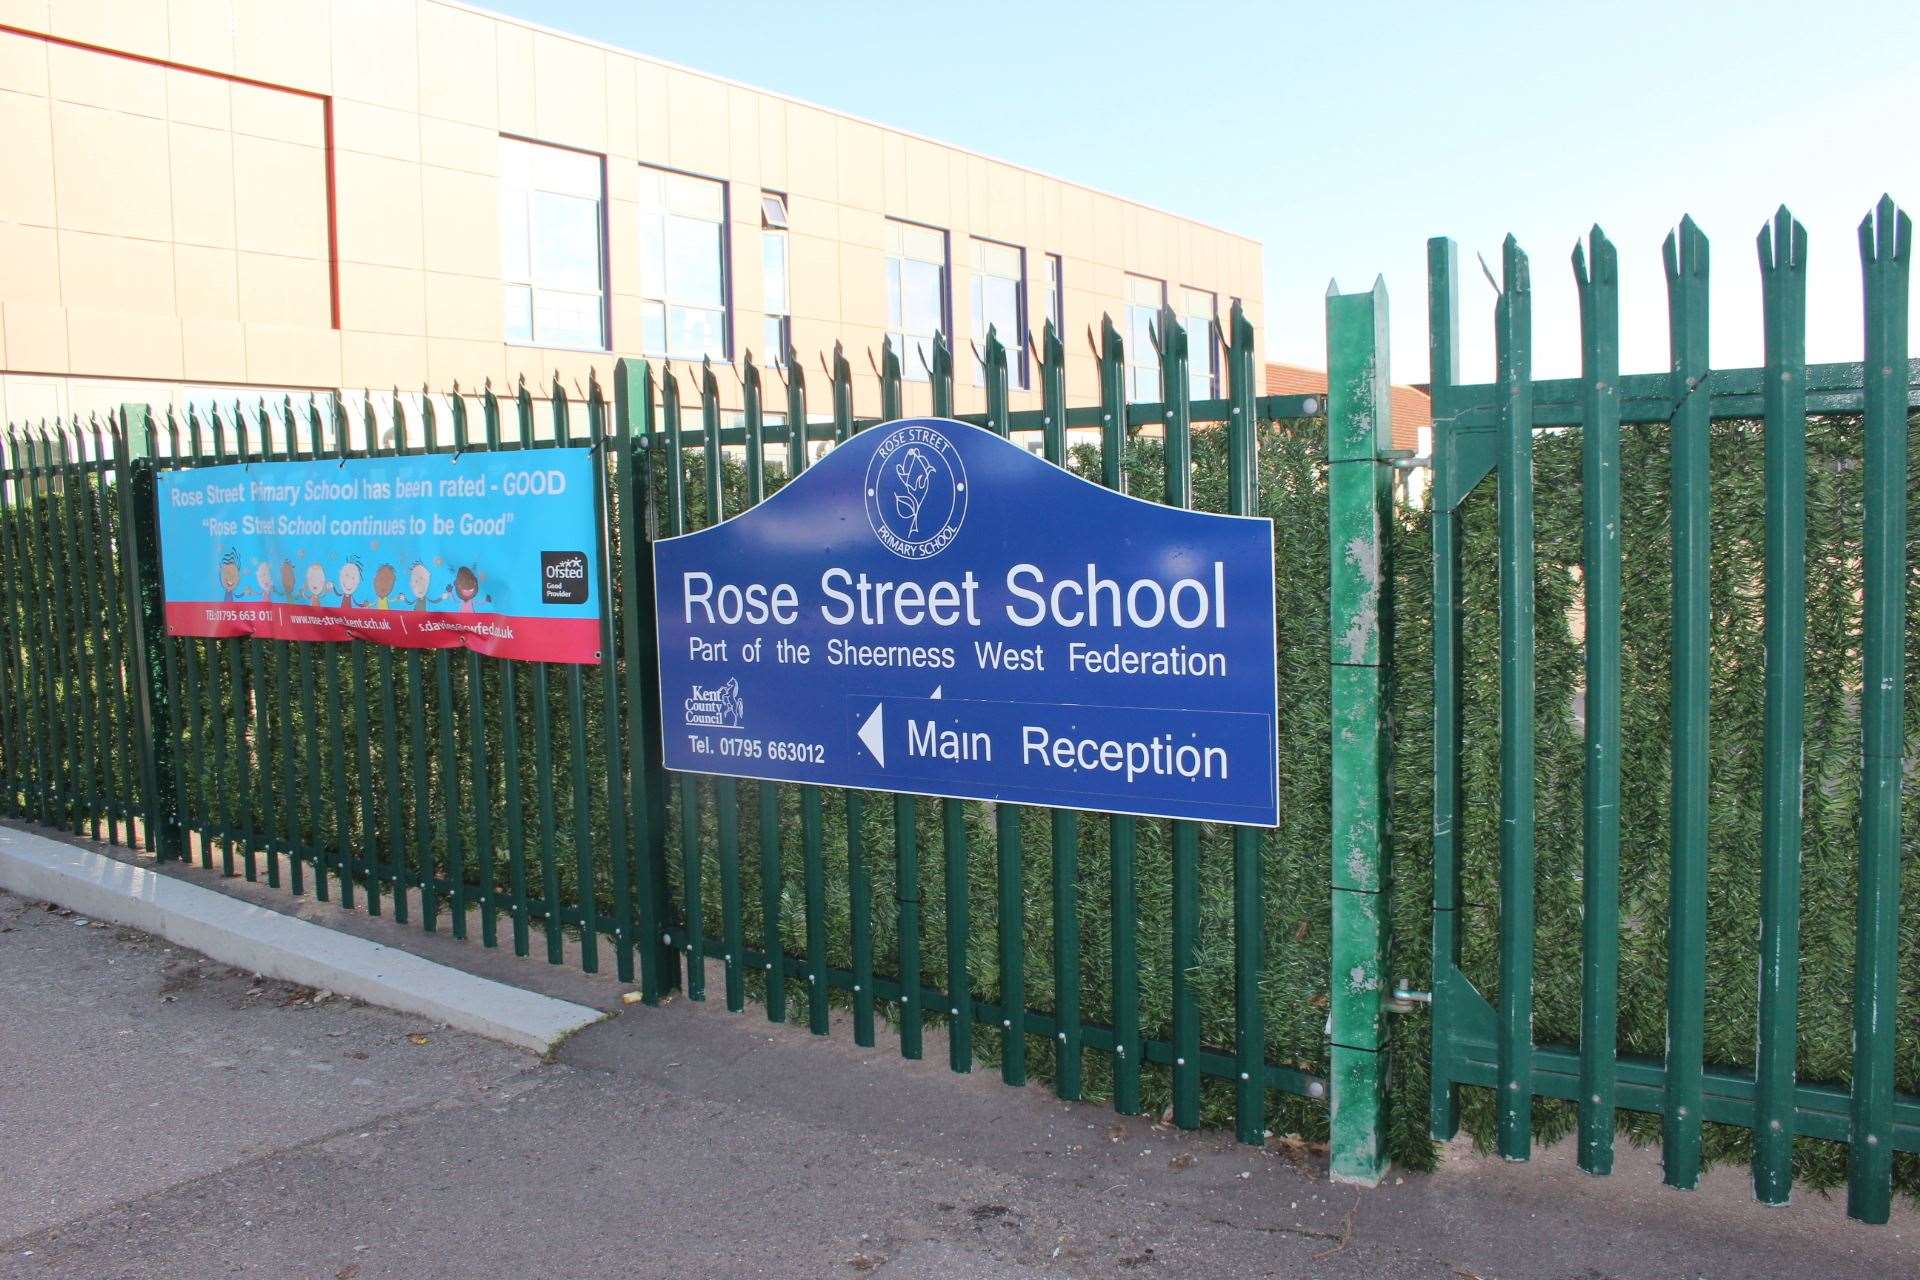 141 people from Rose Street Primary School, Sheerness, were told to isolate this week after two members of staff tested positive for Covid-19